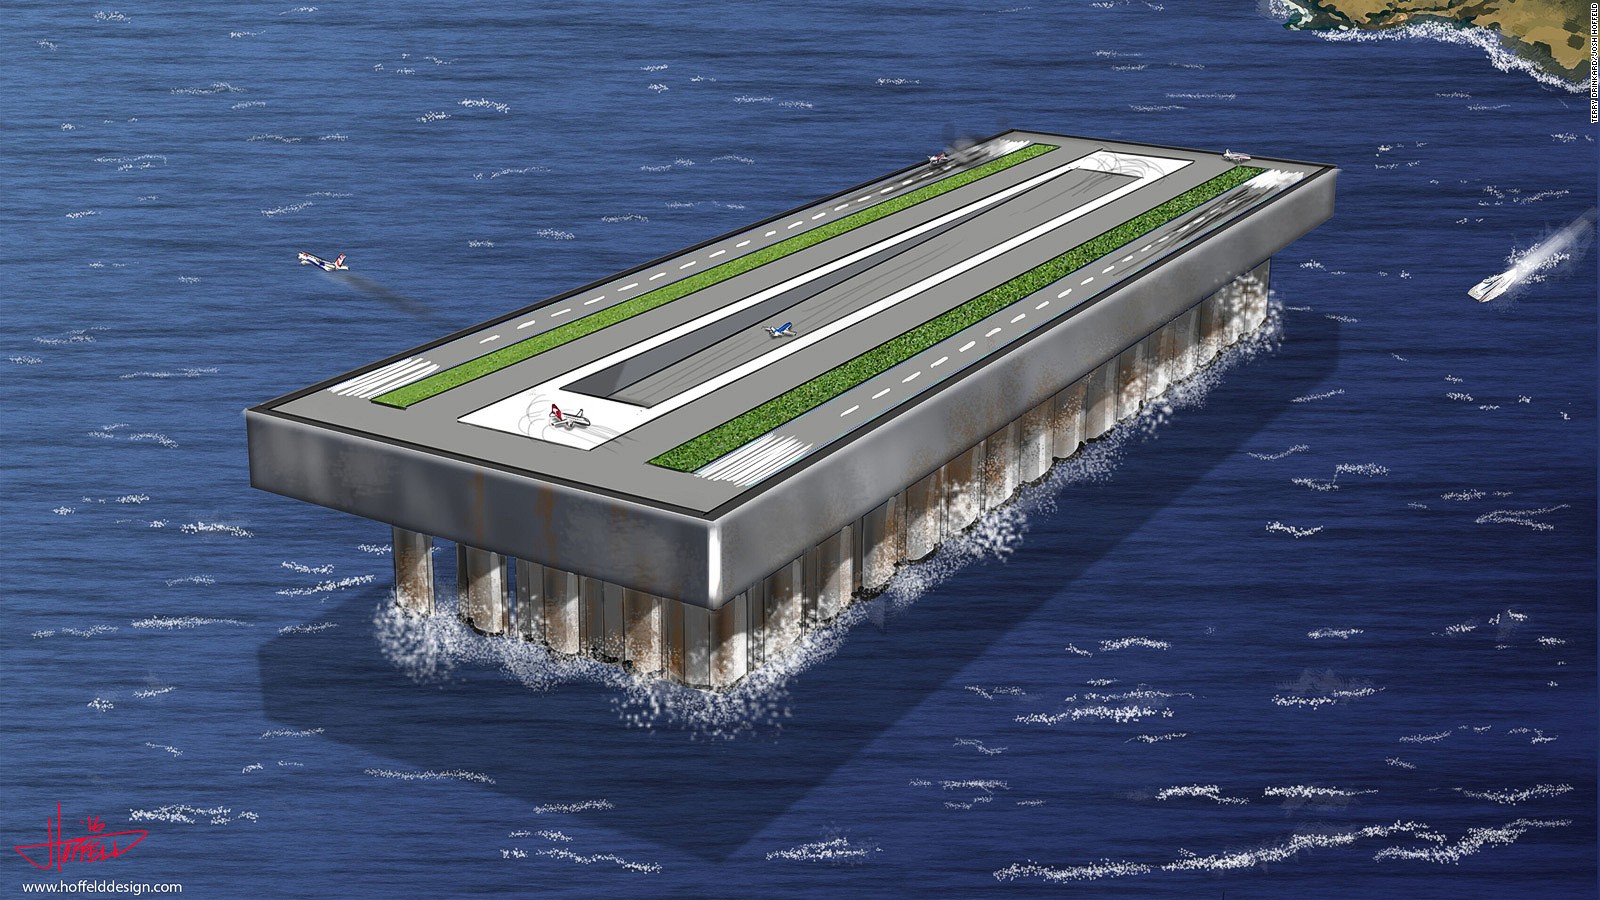 Floating Airports Could They Finally Happen Cnn Travel